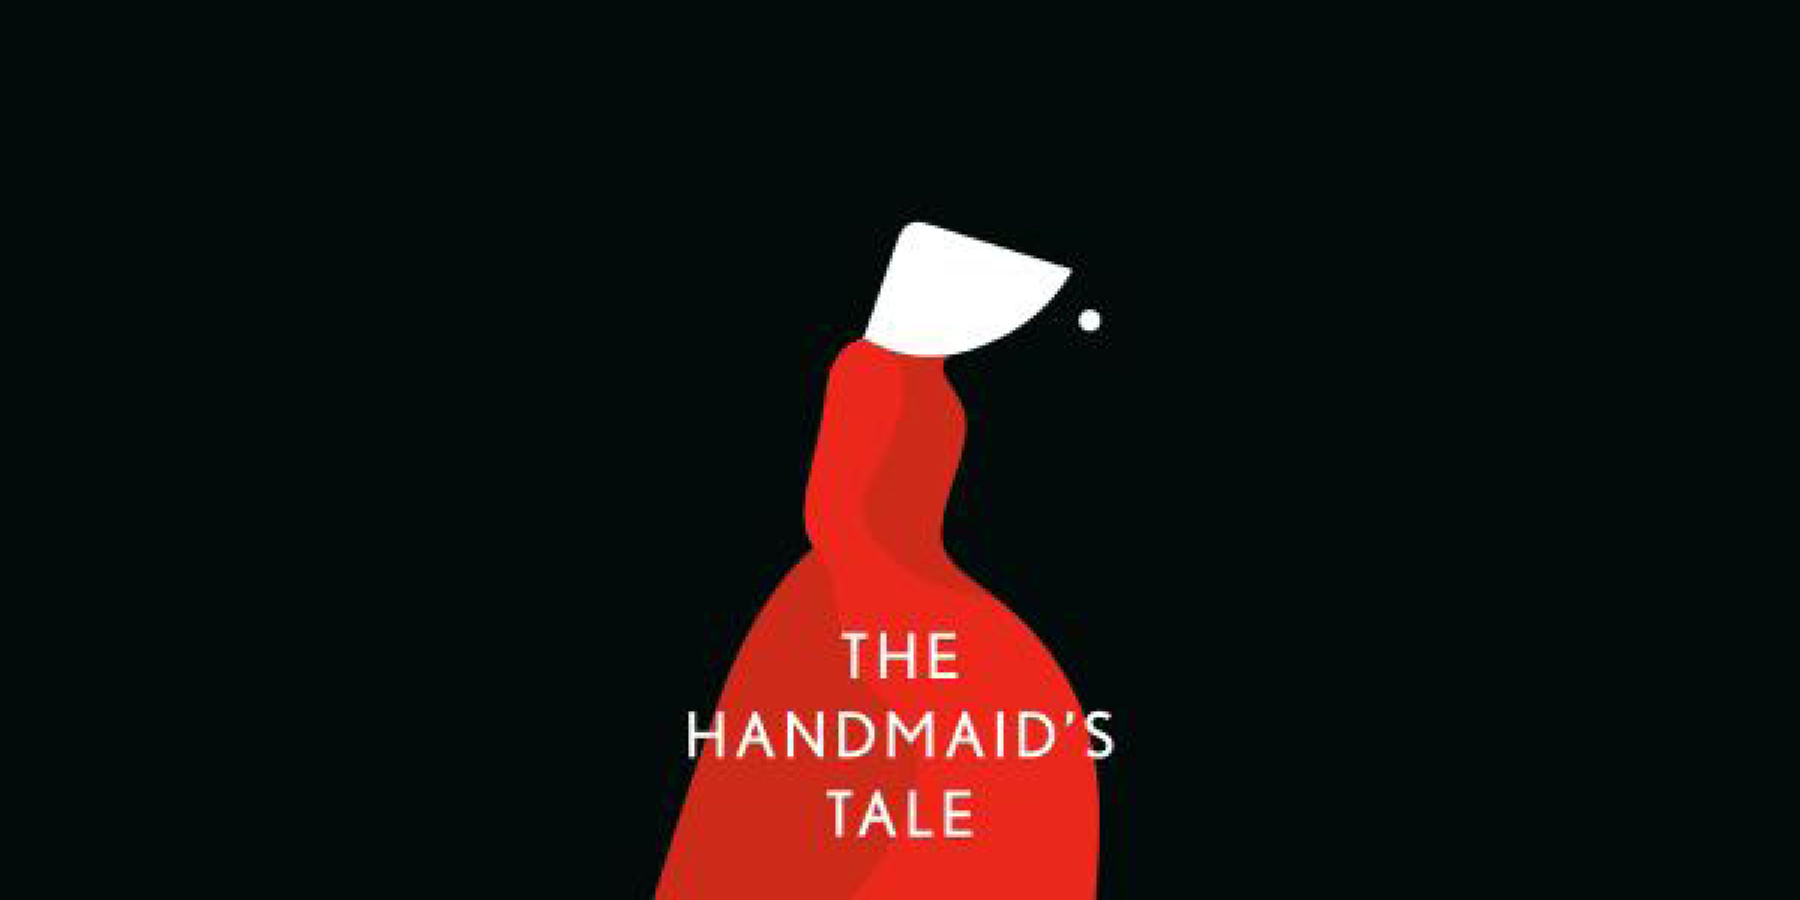 “The Handmaid’s Tale” Culminating Event: Panel Discussion